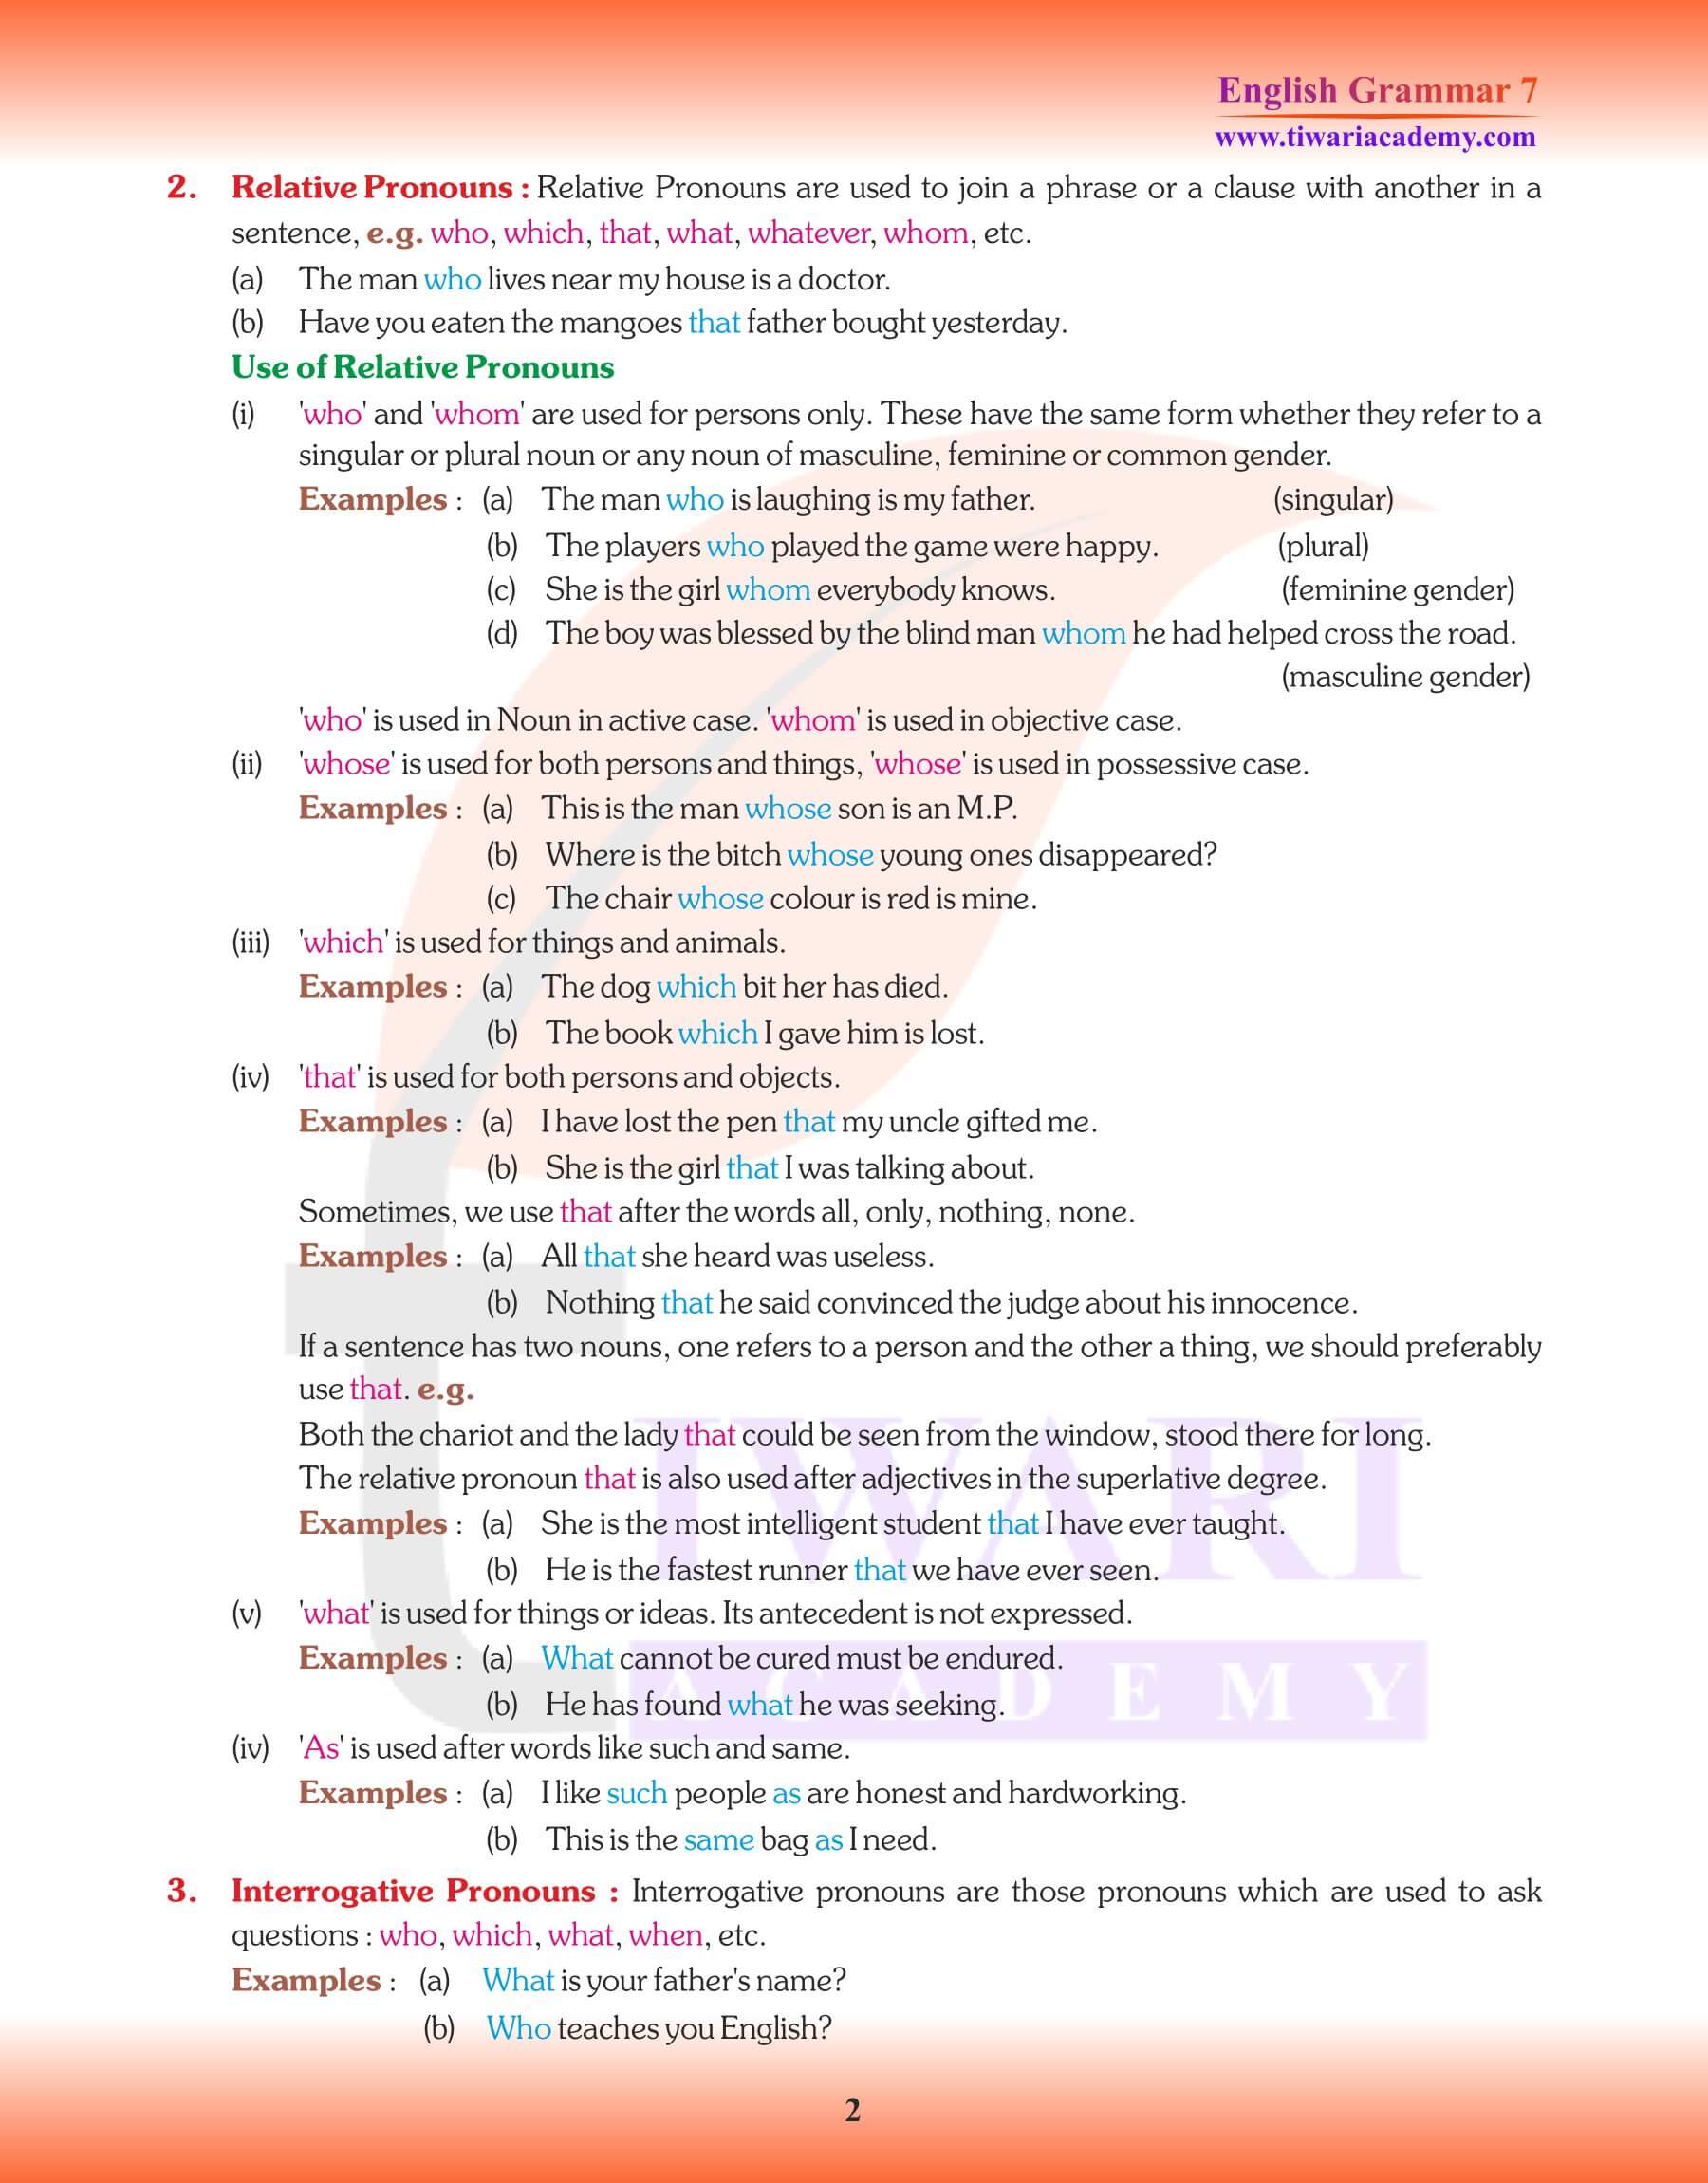 Class 7 English Grammar Chapter 5 Revision exercises